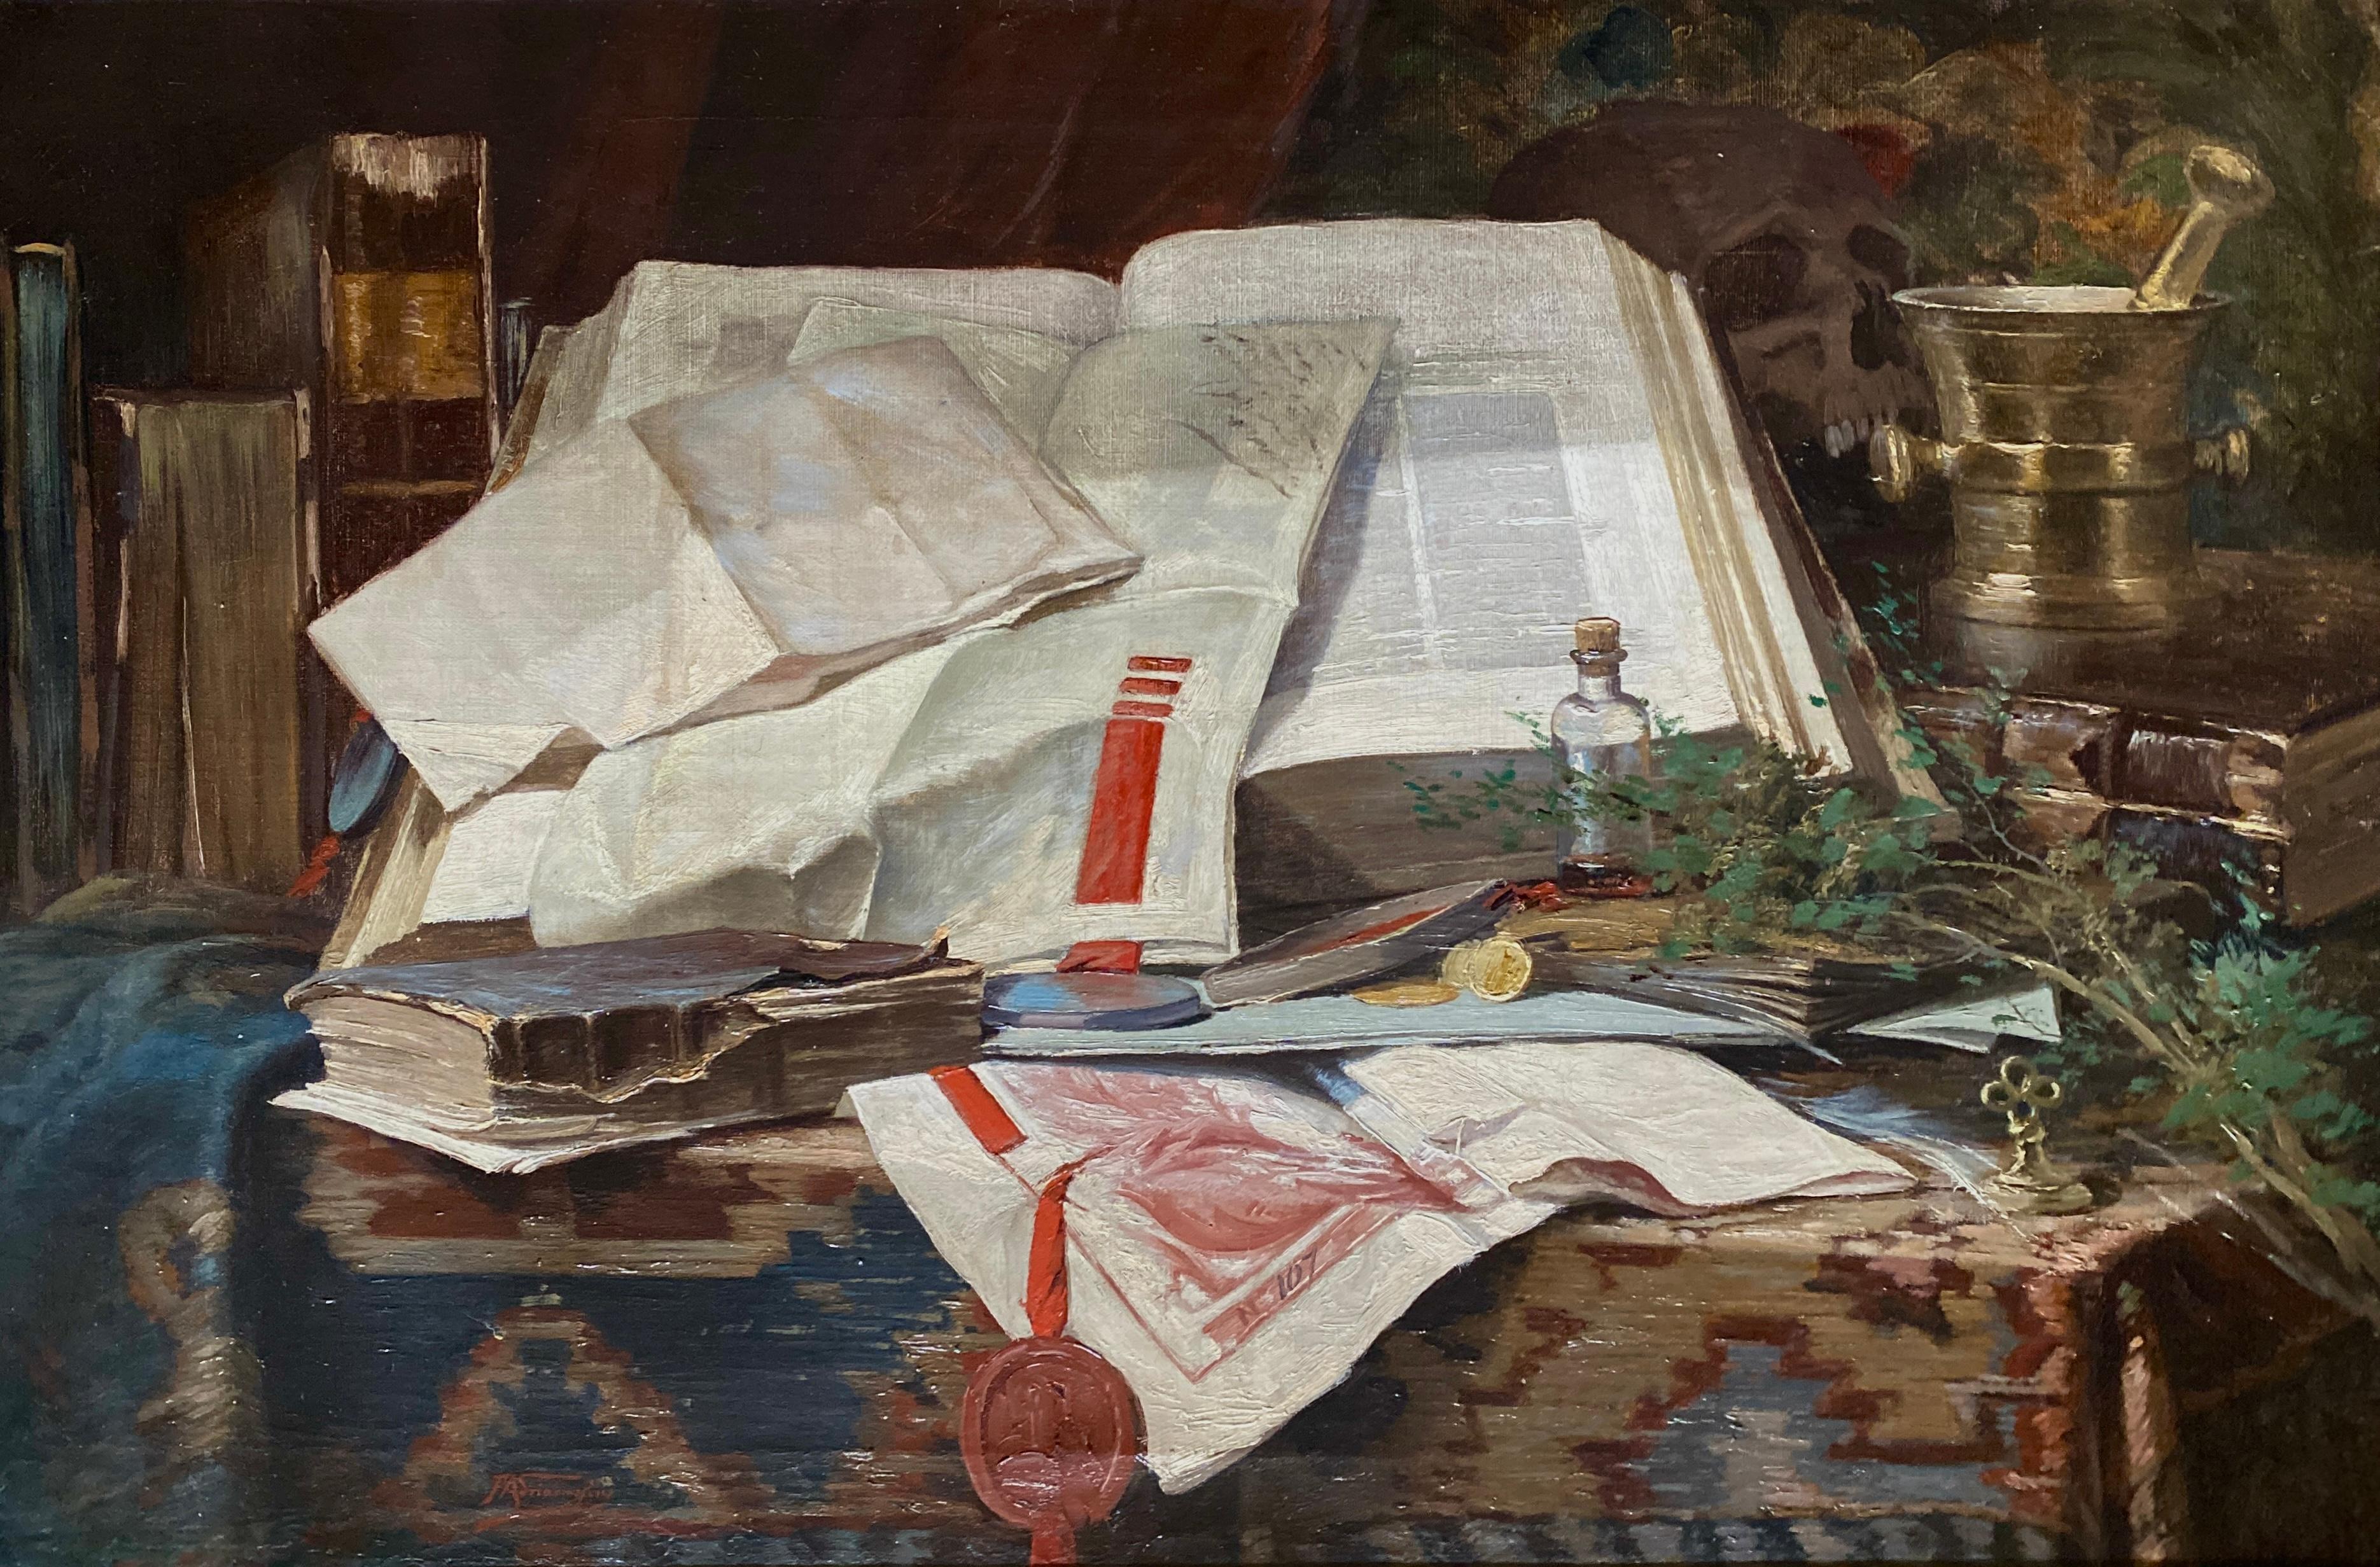 Adriaenssens Fernand
Antwerp 1859 – 1944
Belgian Painter

Still Life with Books
Signature: Signed bottom middle left, on revers signed and placed
Medium: Oil on canvas
Dimensions: Image size 50,50 x 75,50 cm, frame size 62,50 x 87,50 cm

Biography: